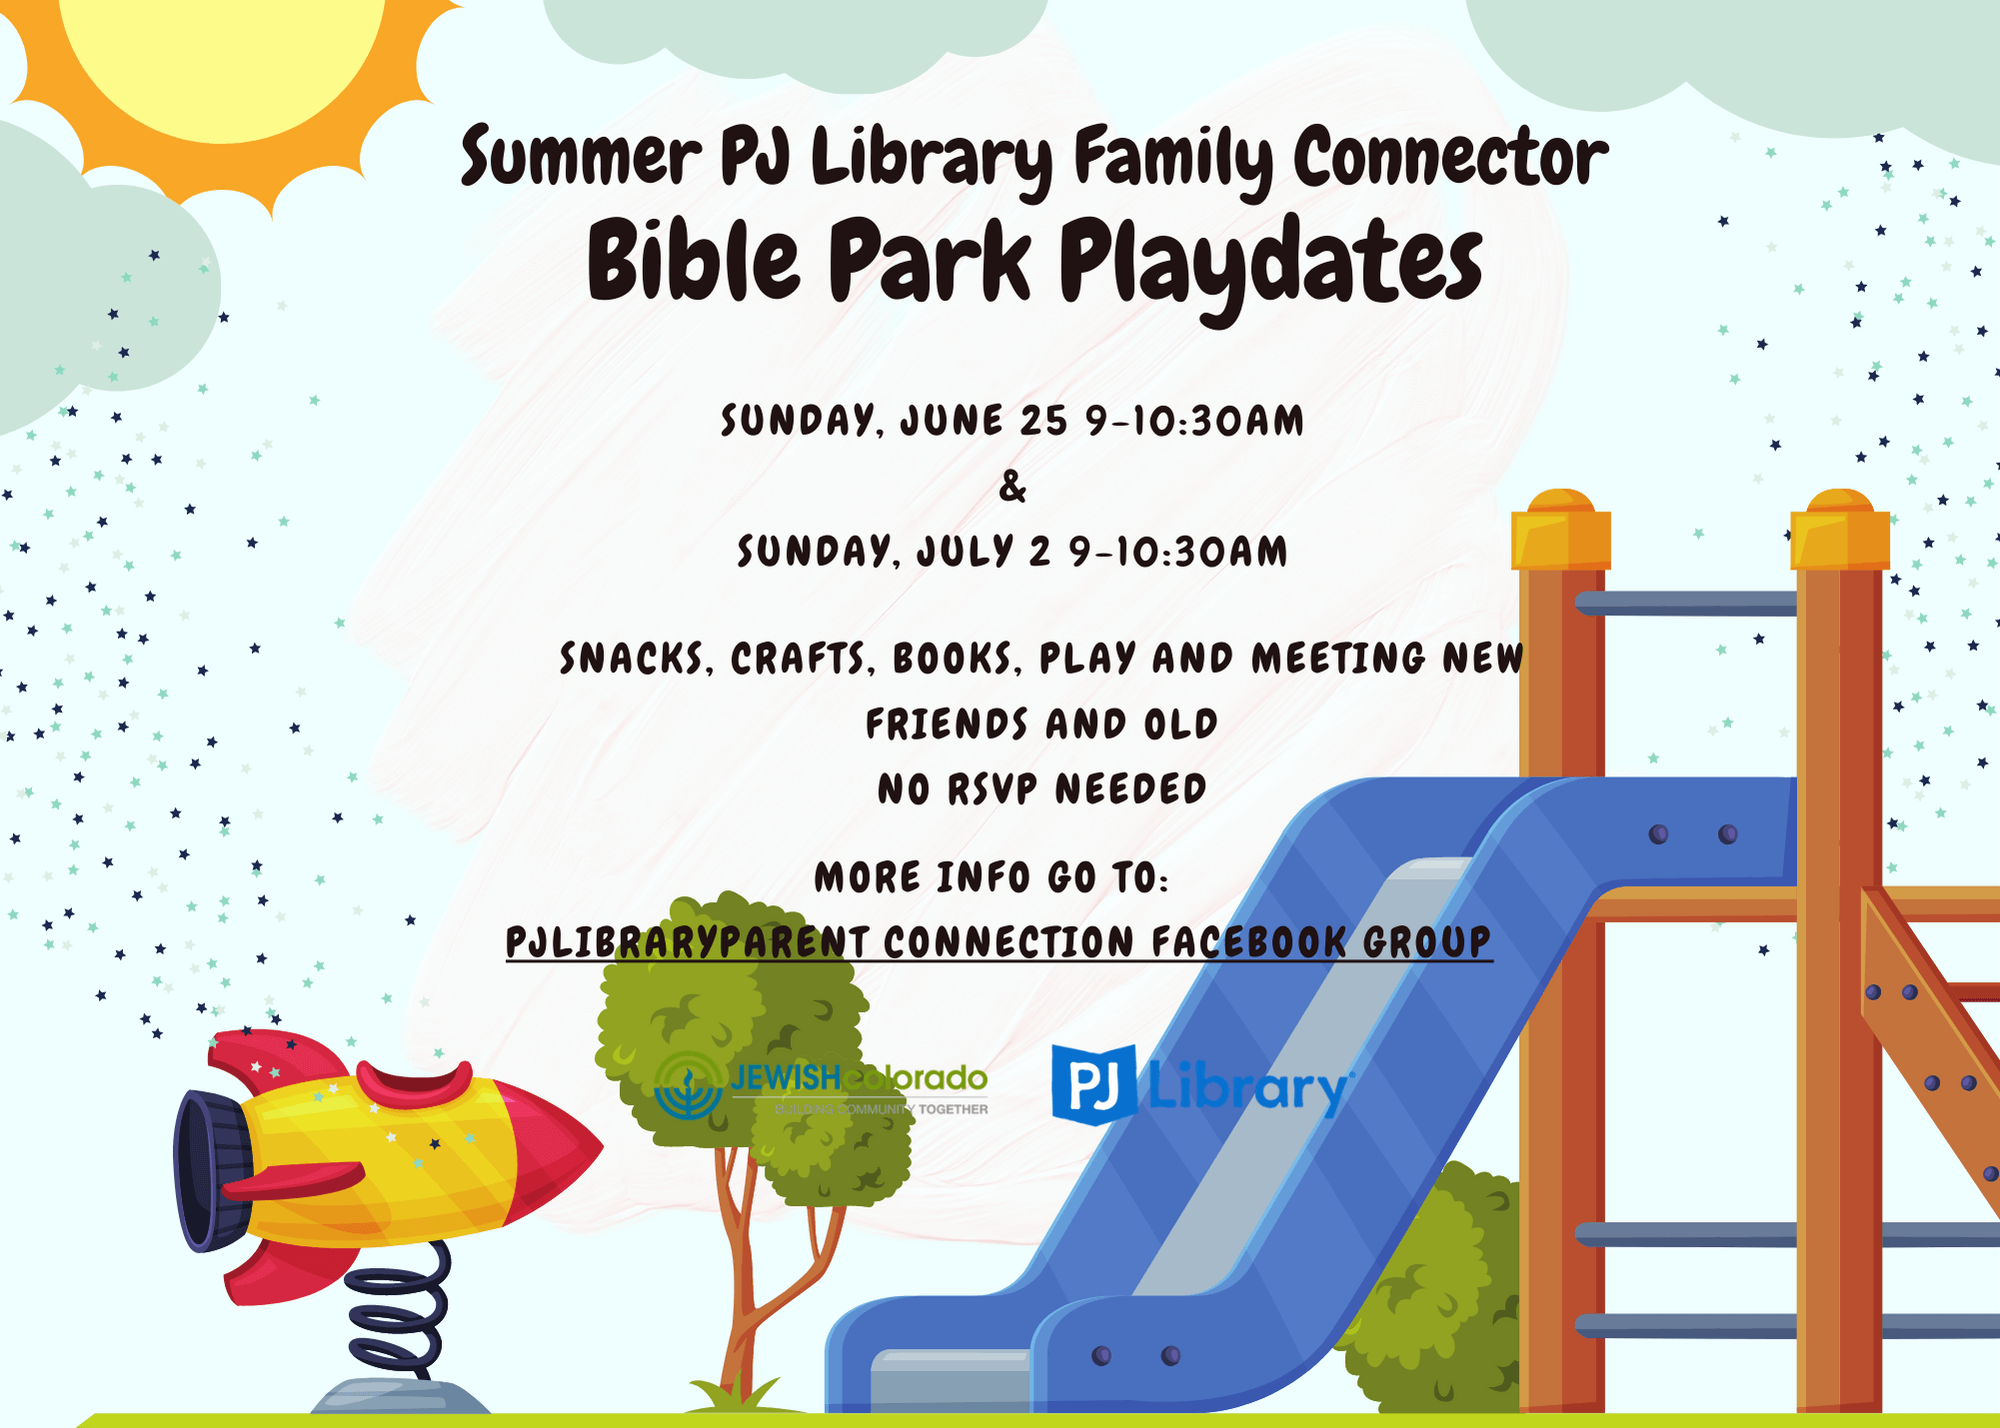 PJ Library Family Connector playdates